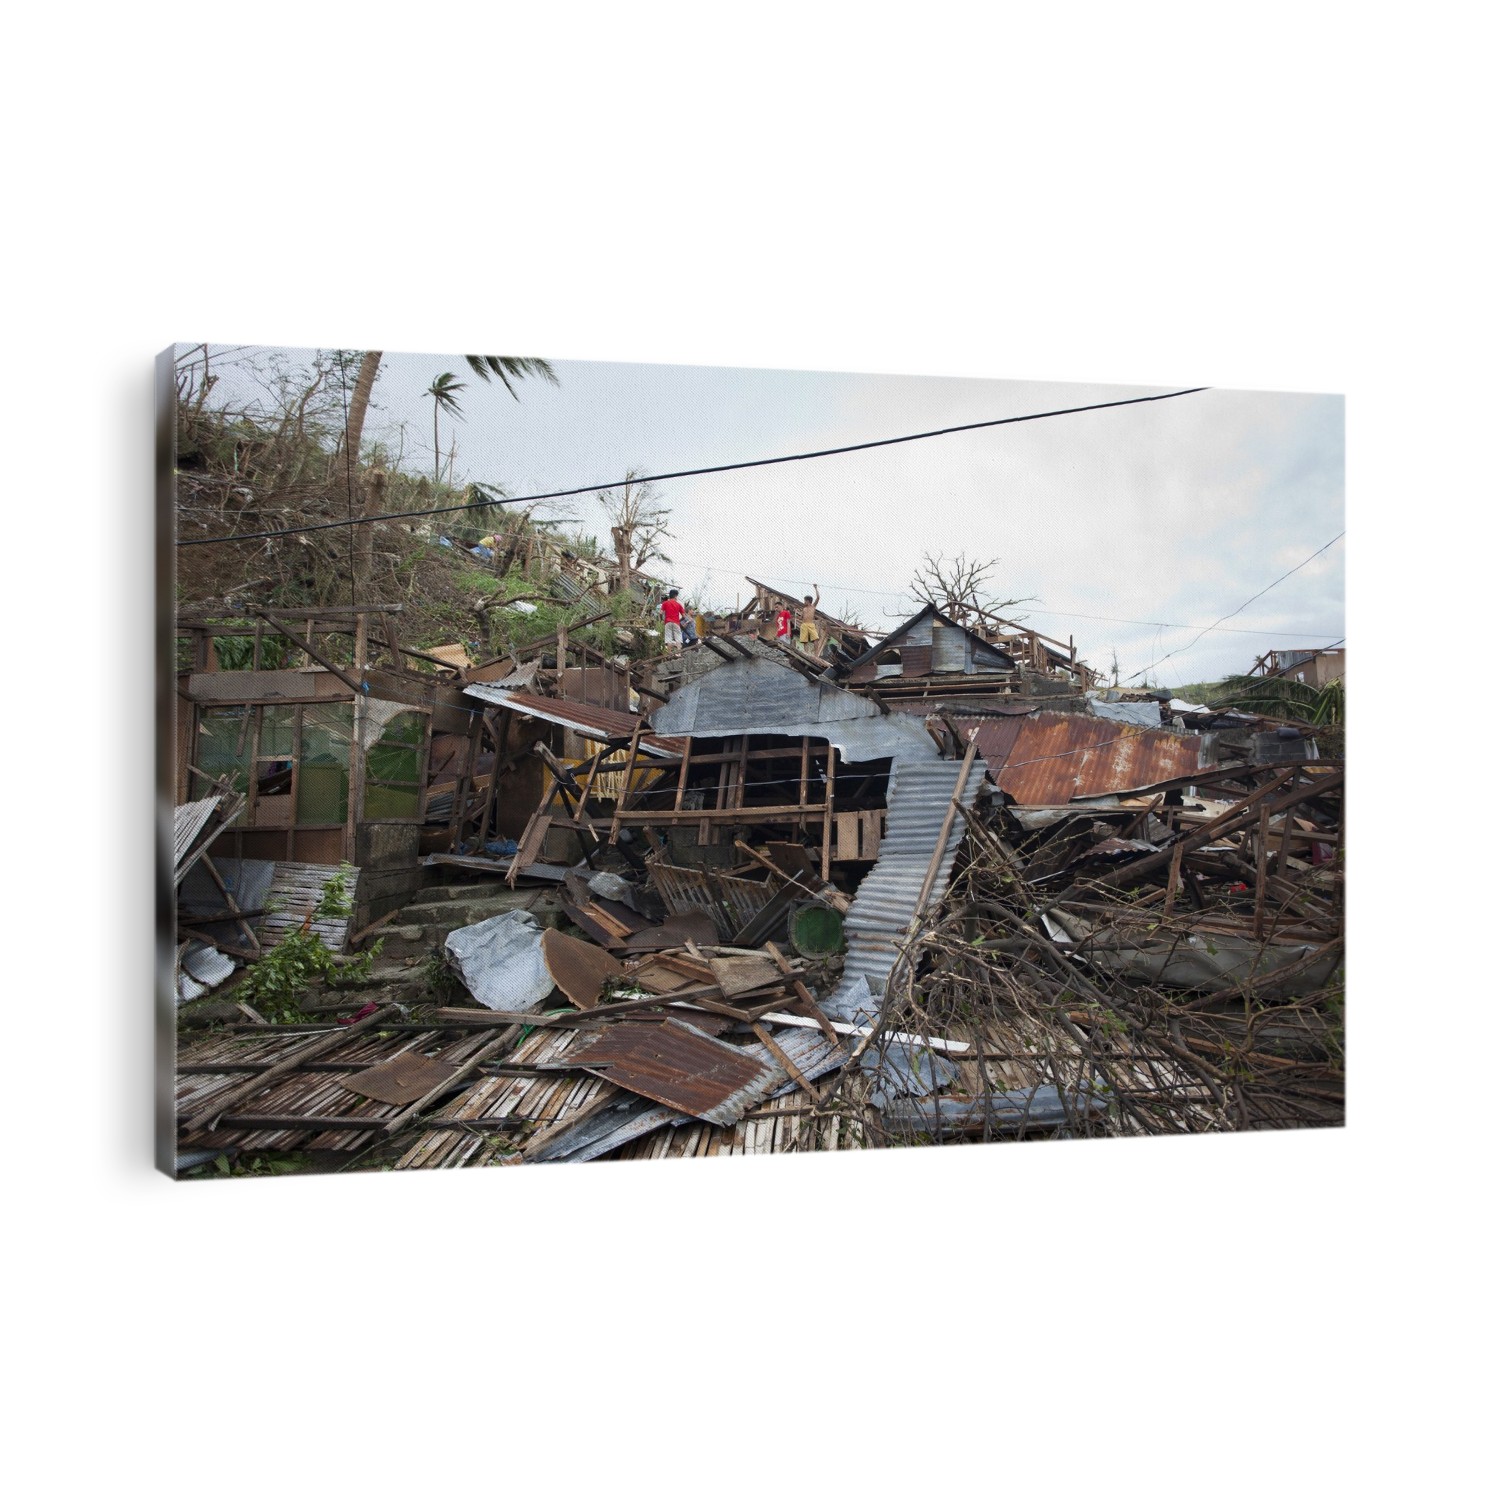 Destruction to a shanty town after super typhoon Haiyan. Haiyan was the strongest tropical cyclone ever recorded to have made landfall, with sustained winds of more than 300 kilometres per hour at its peak. The island of Leyte, and in particular its capital Tacloban, bore the brunt of Haiyan's force. More than 6200 people were confirmed killed, with nearly 2000 missing. Photographed in Tacloban, Leyte, in the Philippines, in November 2013.